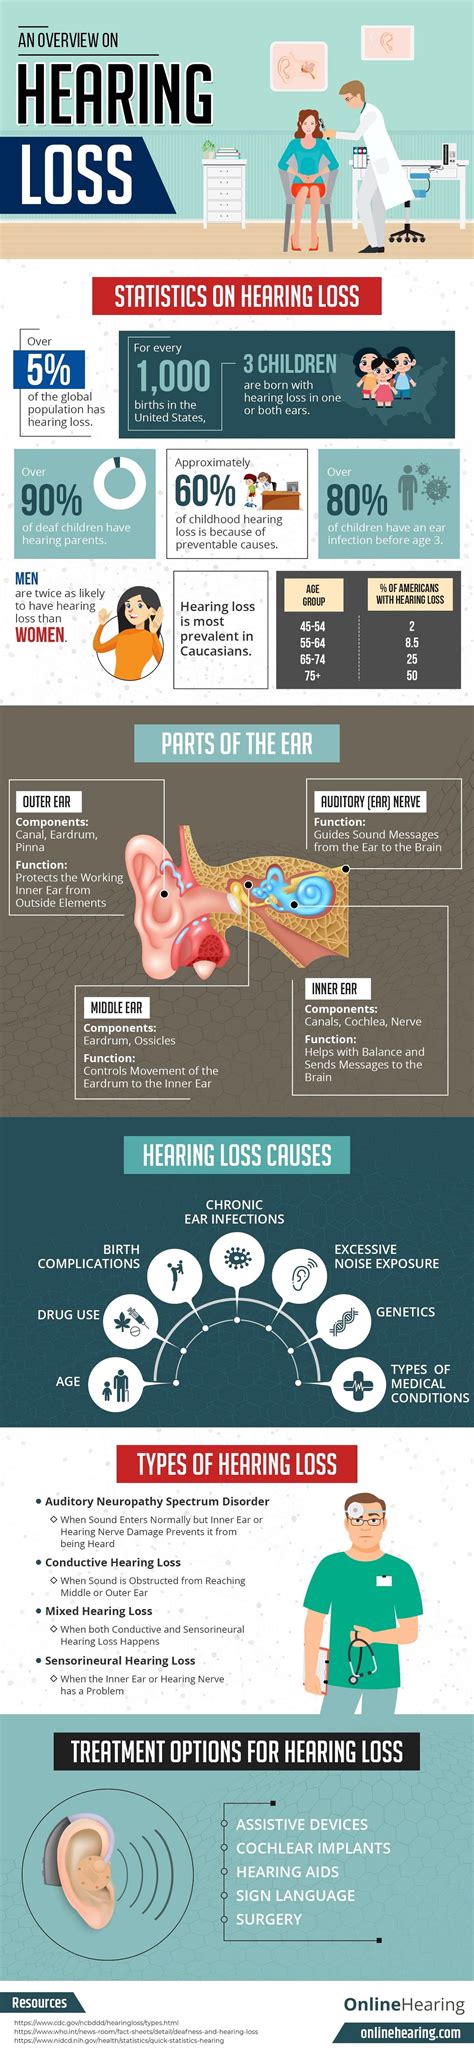 An Overview Of Hearing Loss Infographic Visualistan